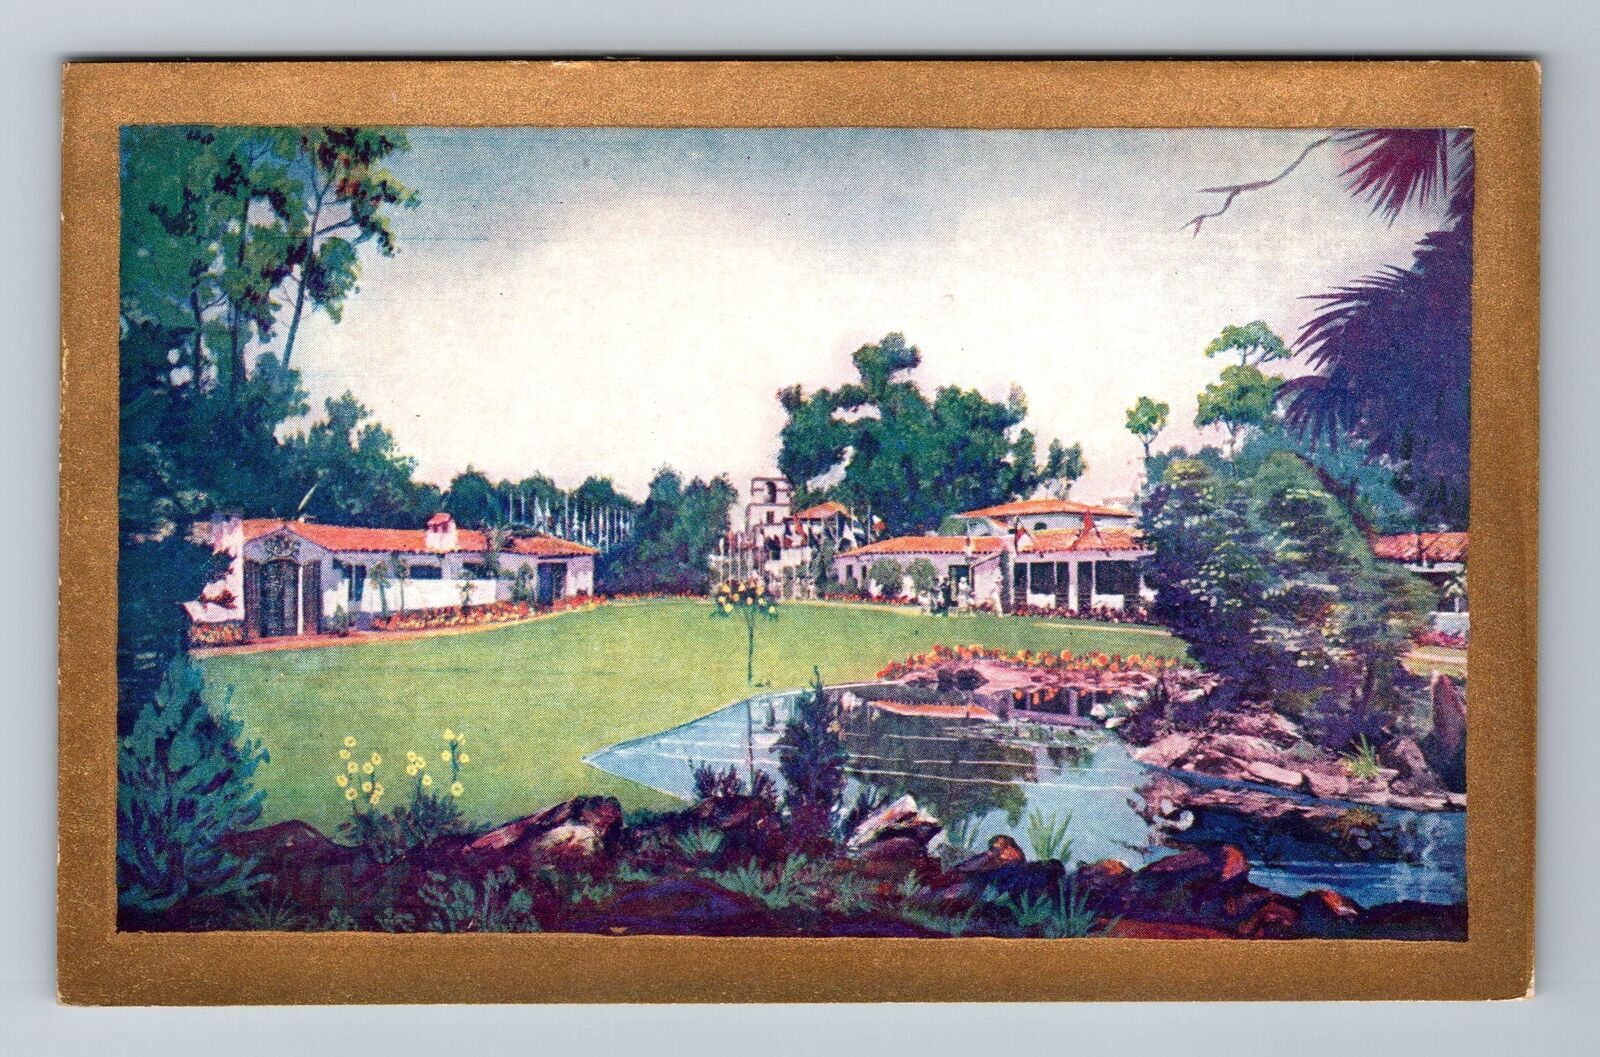 CA-California, House Pacific Relations, Scenic View, Vintage Postcard